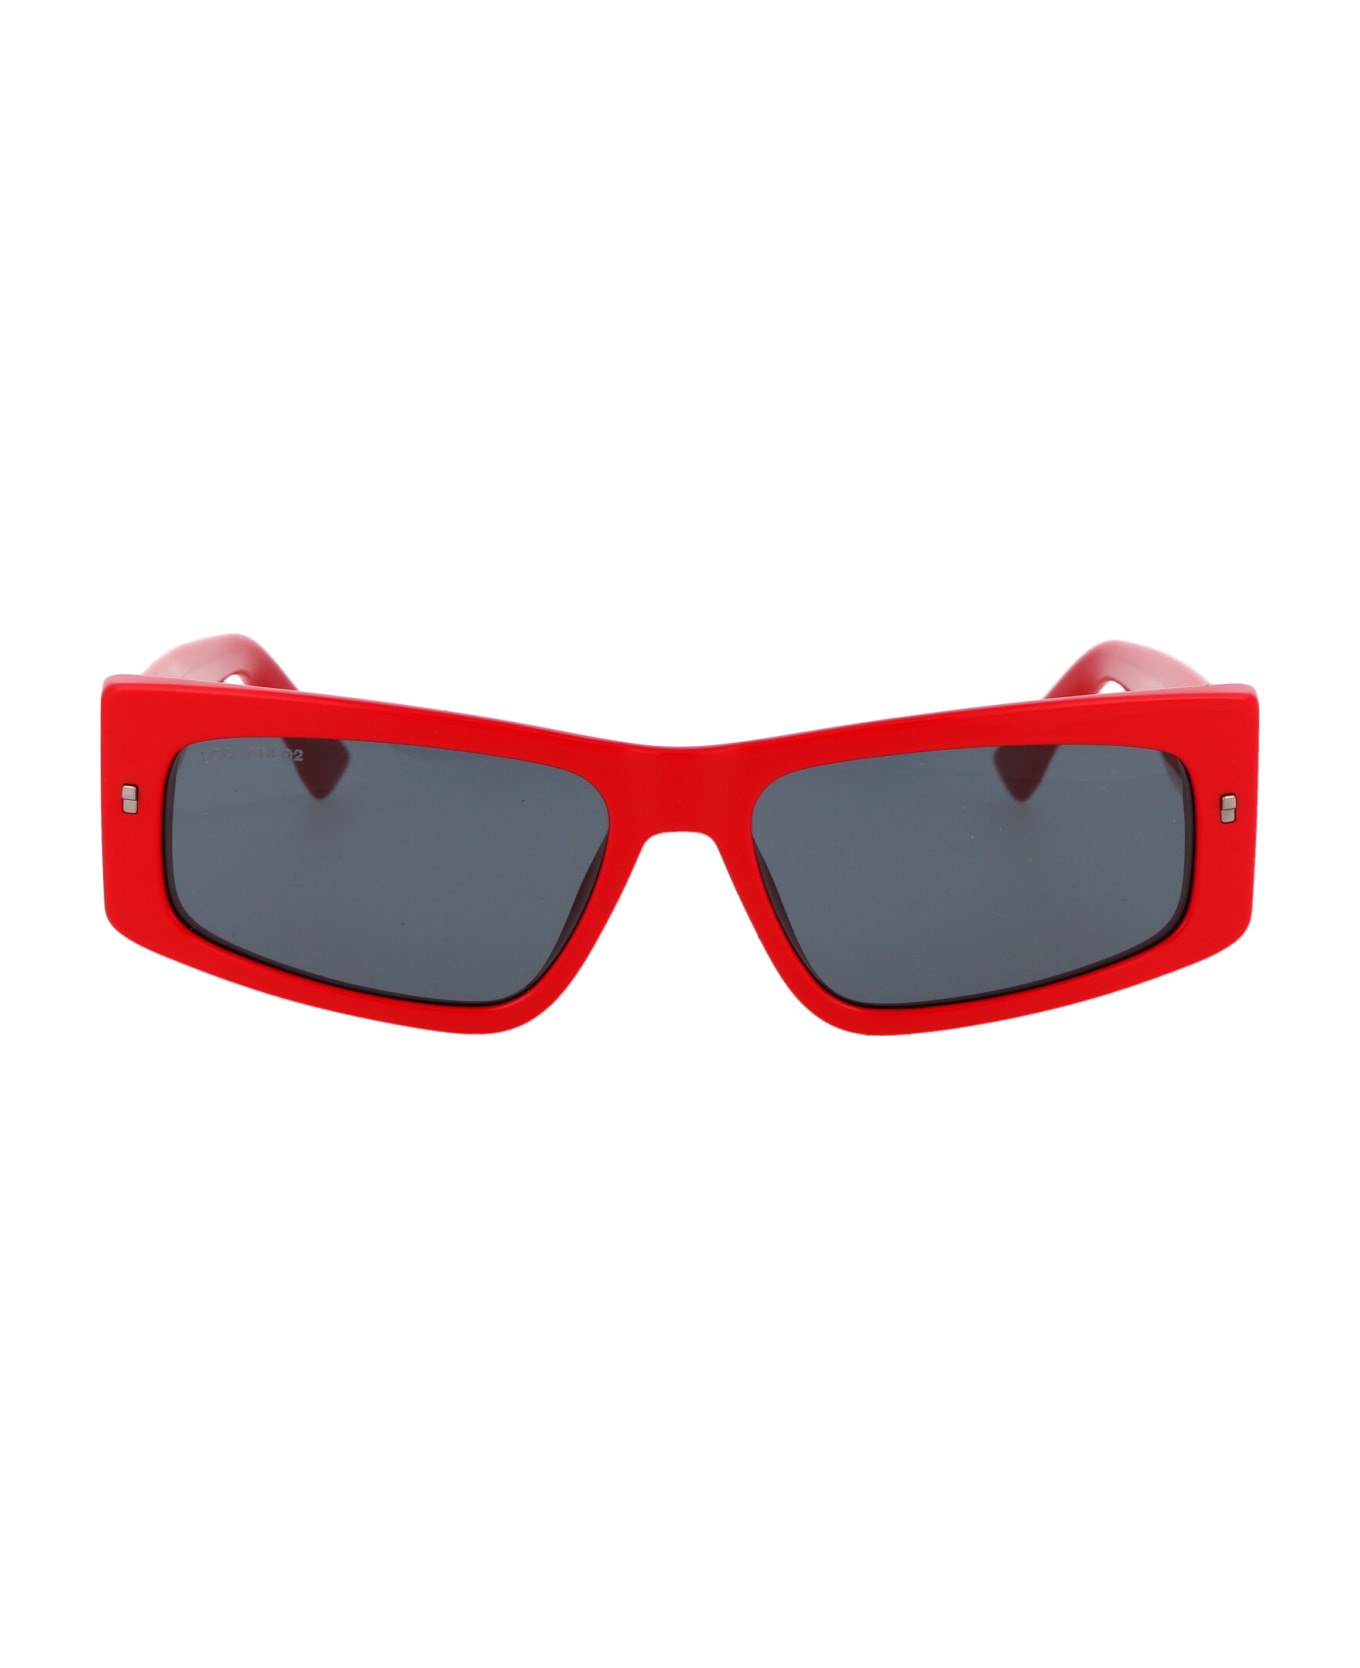 Dsquared2 Eyewear Icon 0007/s Sunglasses - C9AIR RED